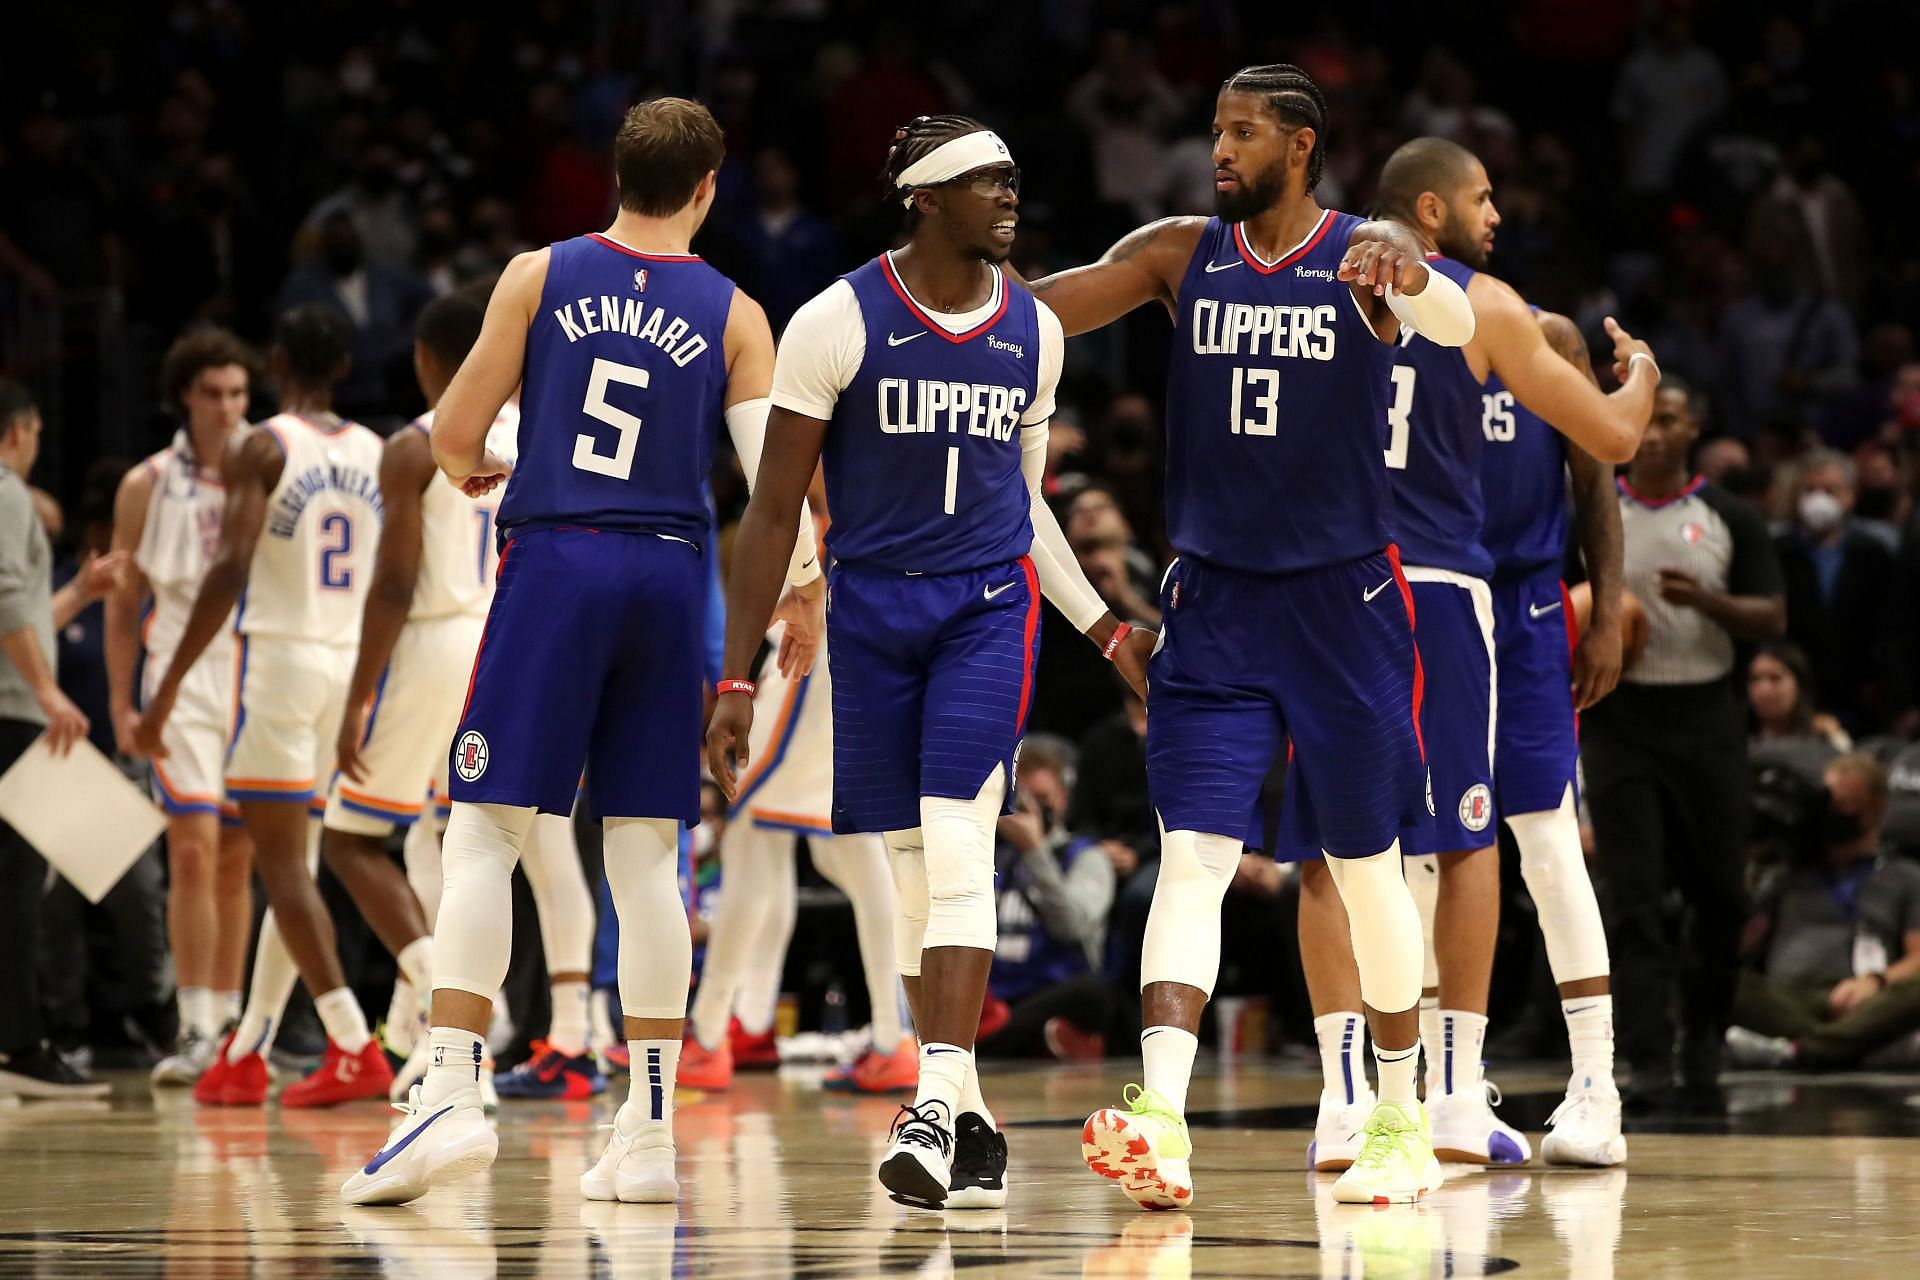 The LA Clippers will be looking to win it all next season